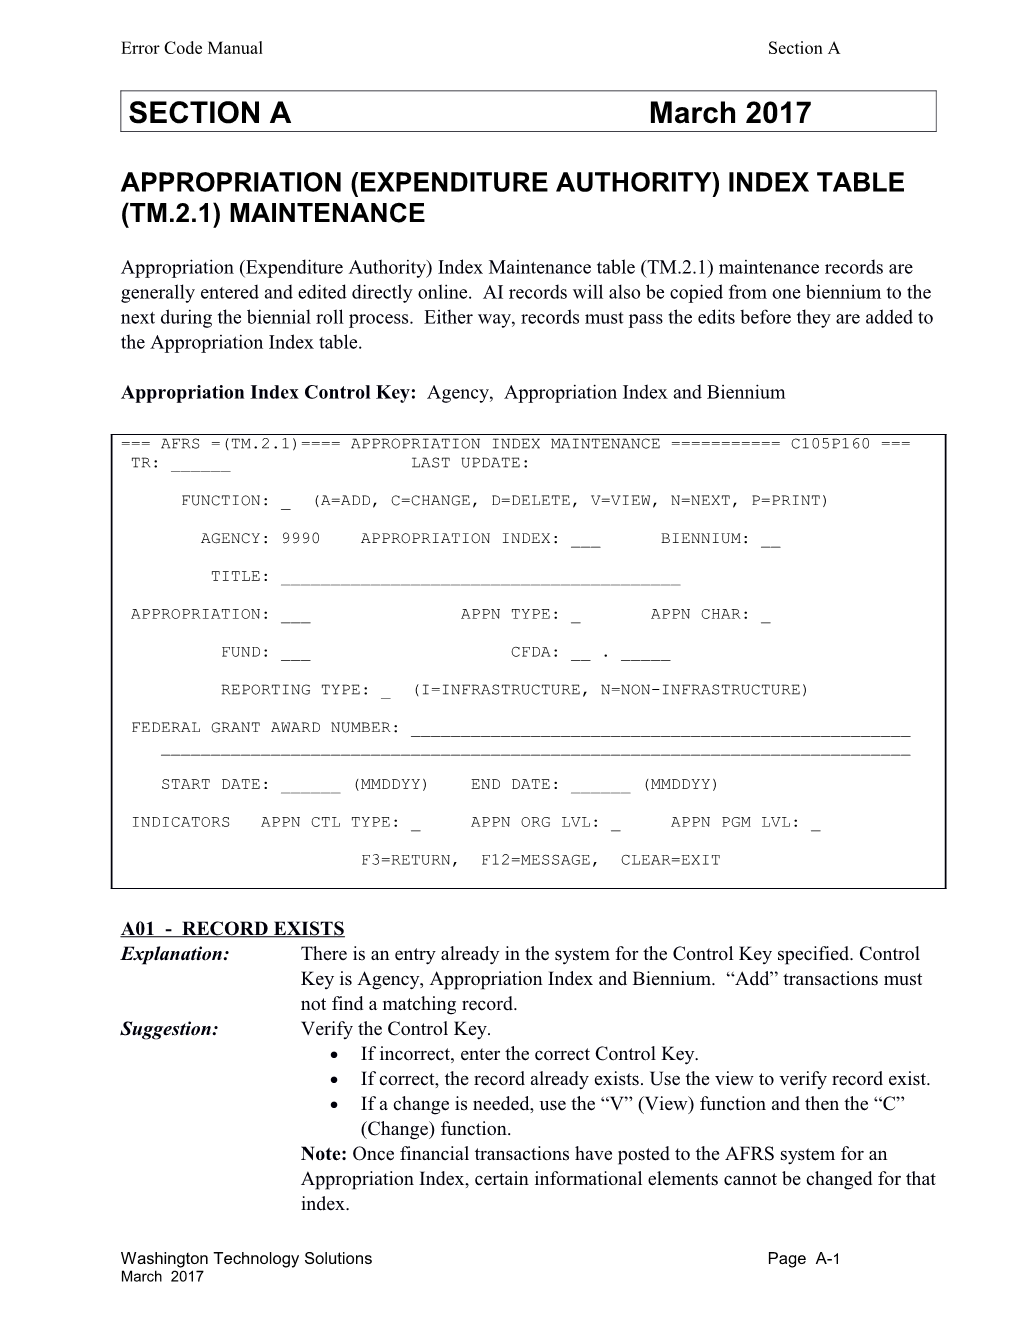 Appropriation (Expenditure Authority) Index Table (Tm.2.1)Maintenance